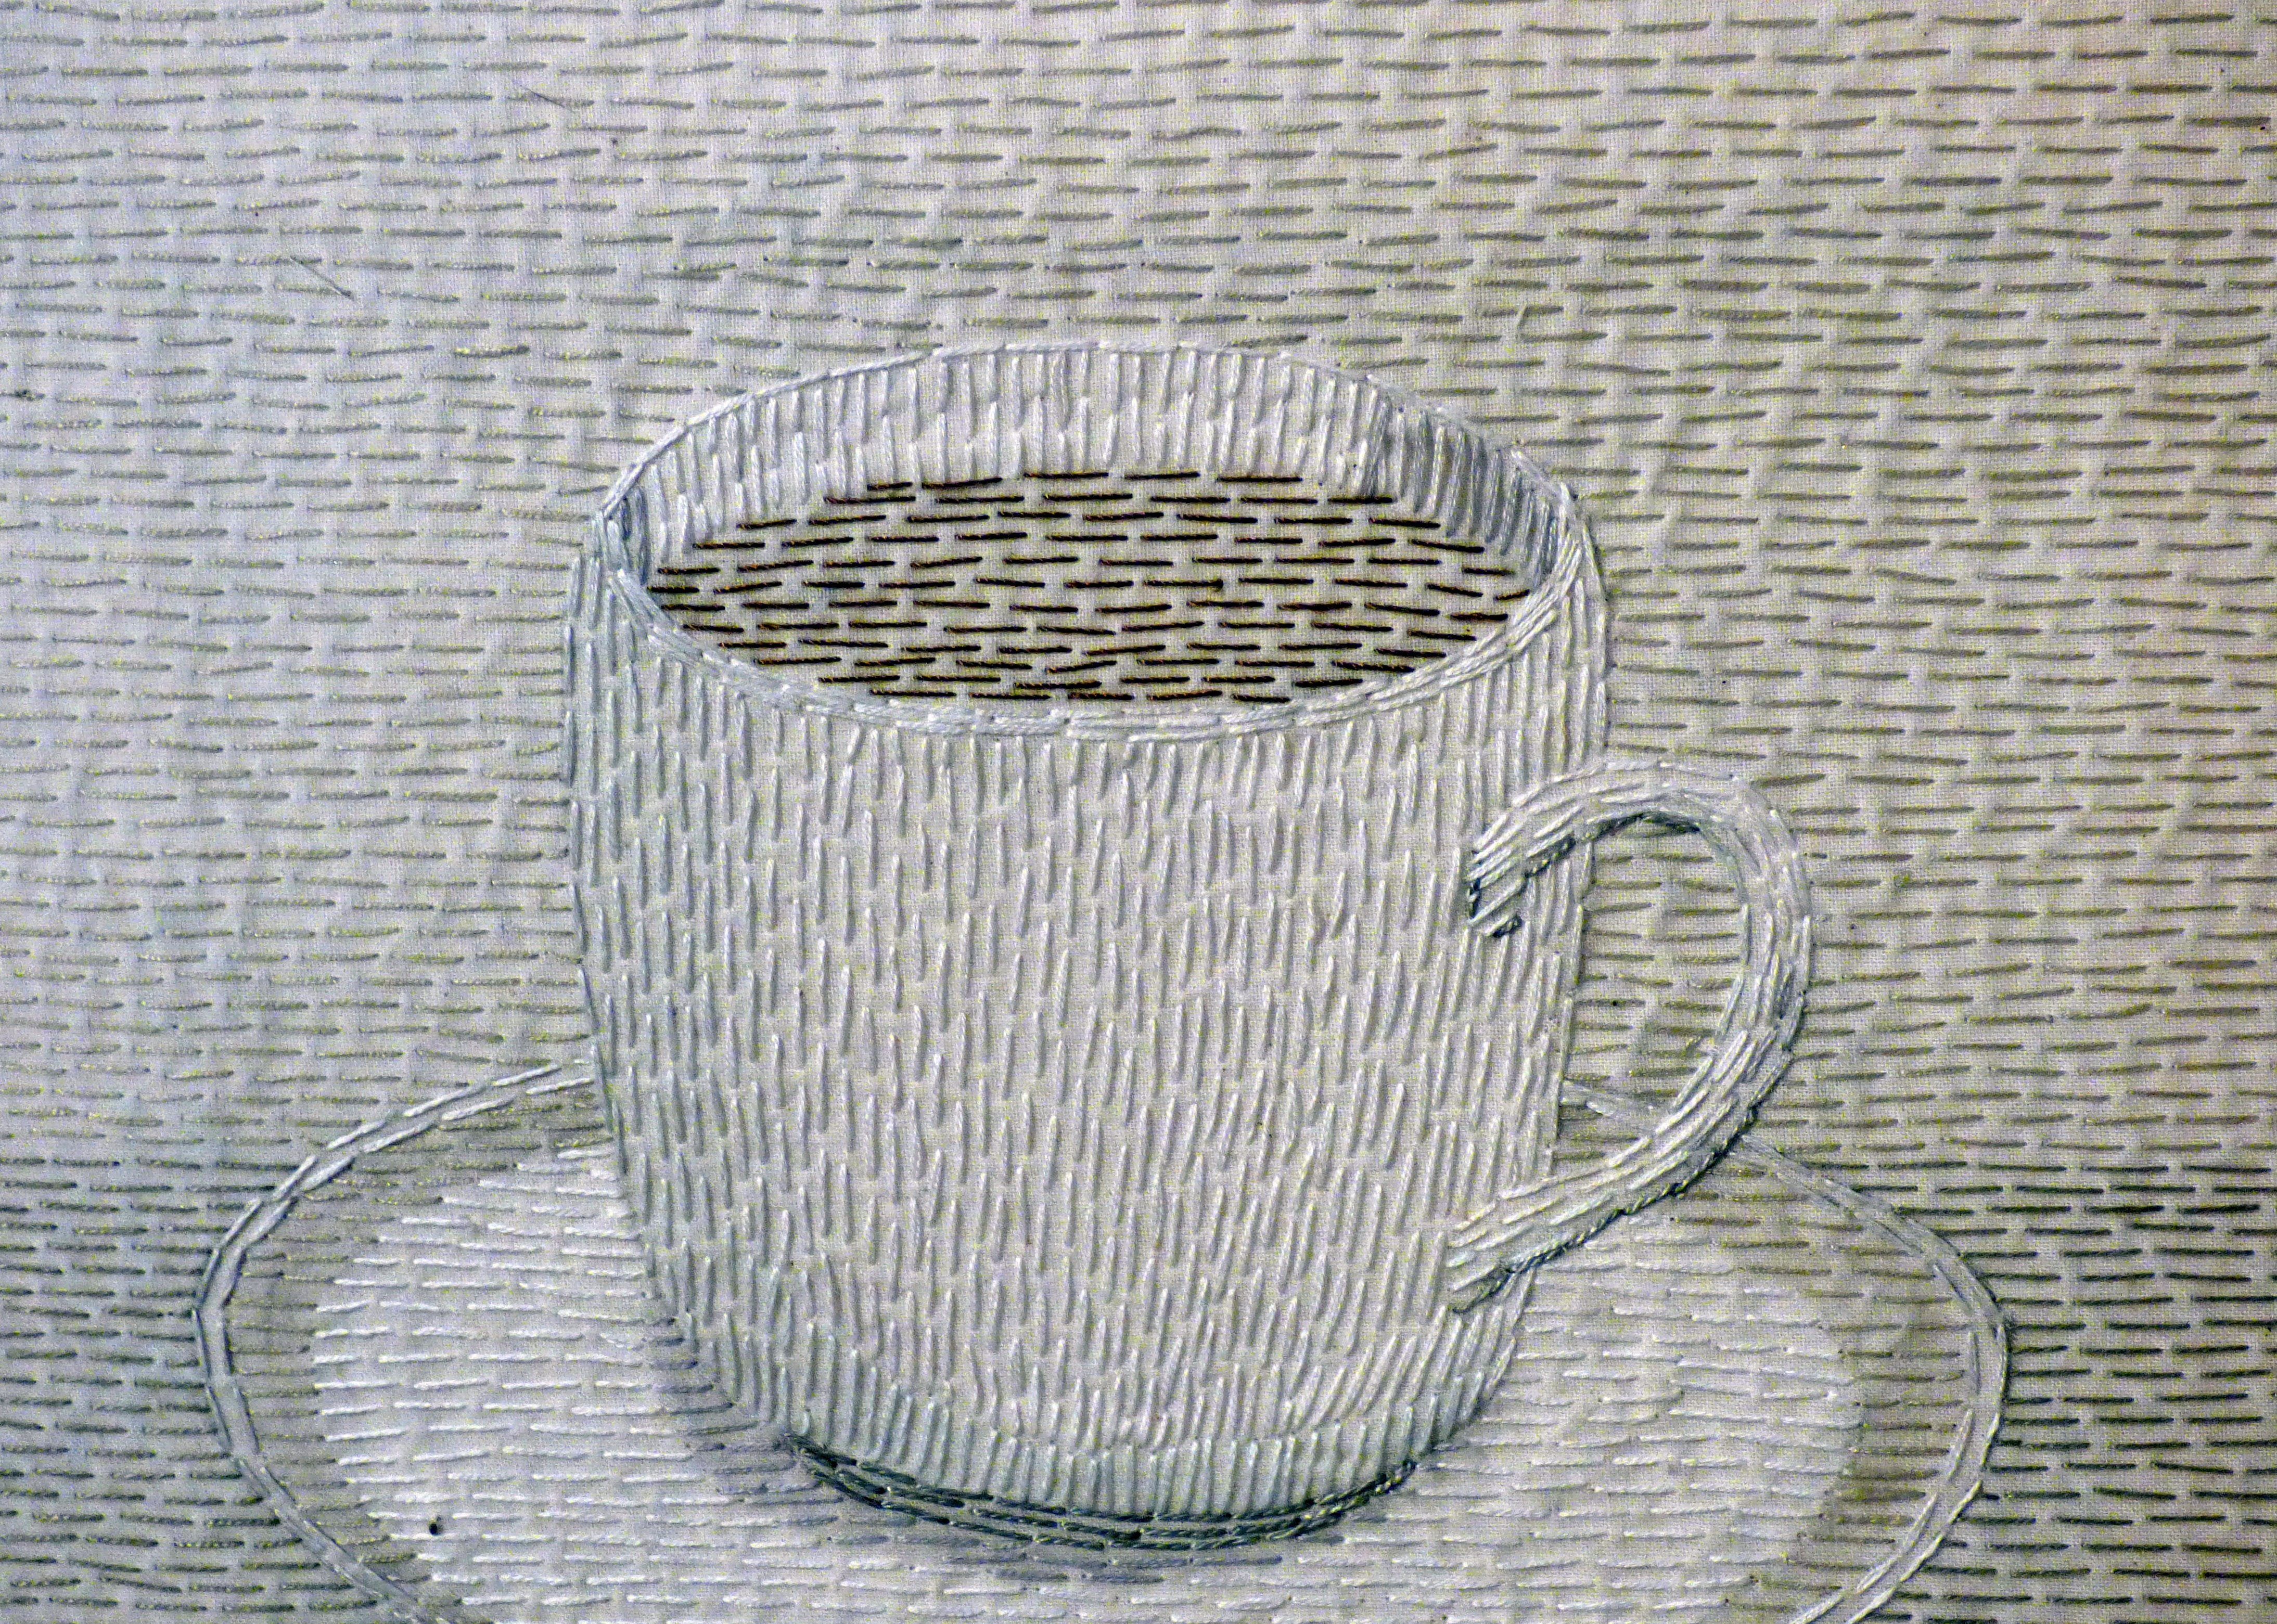 SIMPLE PLEASURES: COFFEE by Audrey Walker, hand stitch, 2014